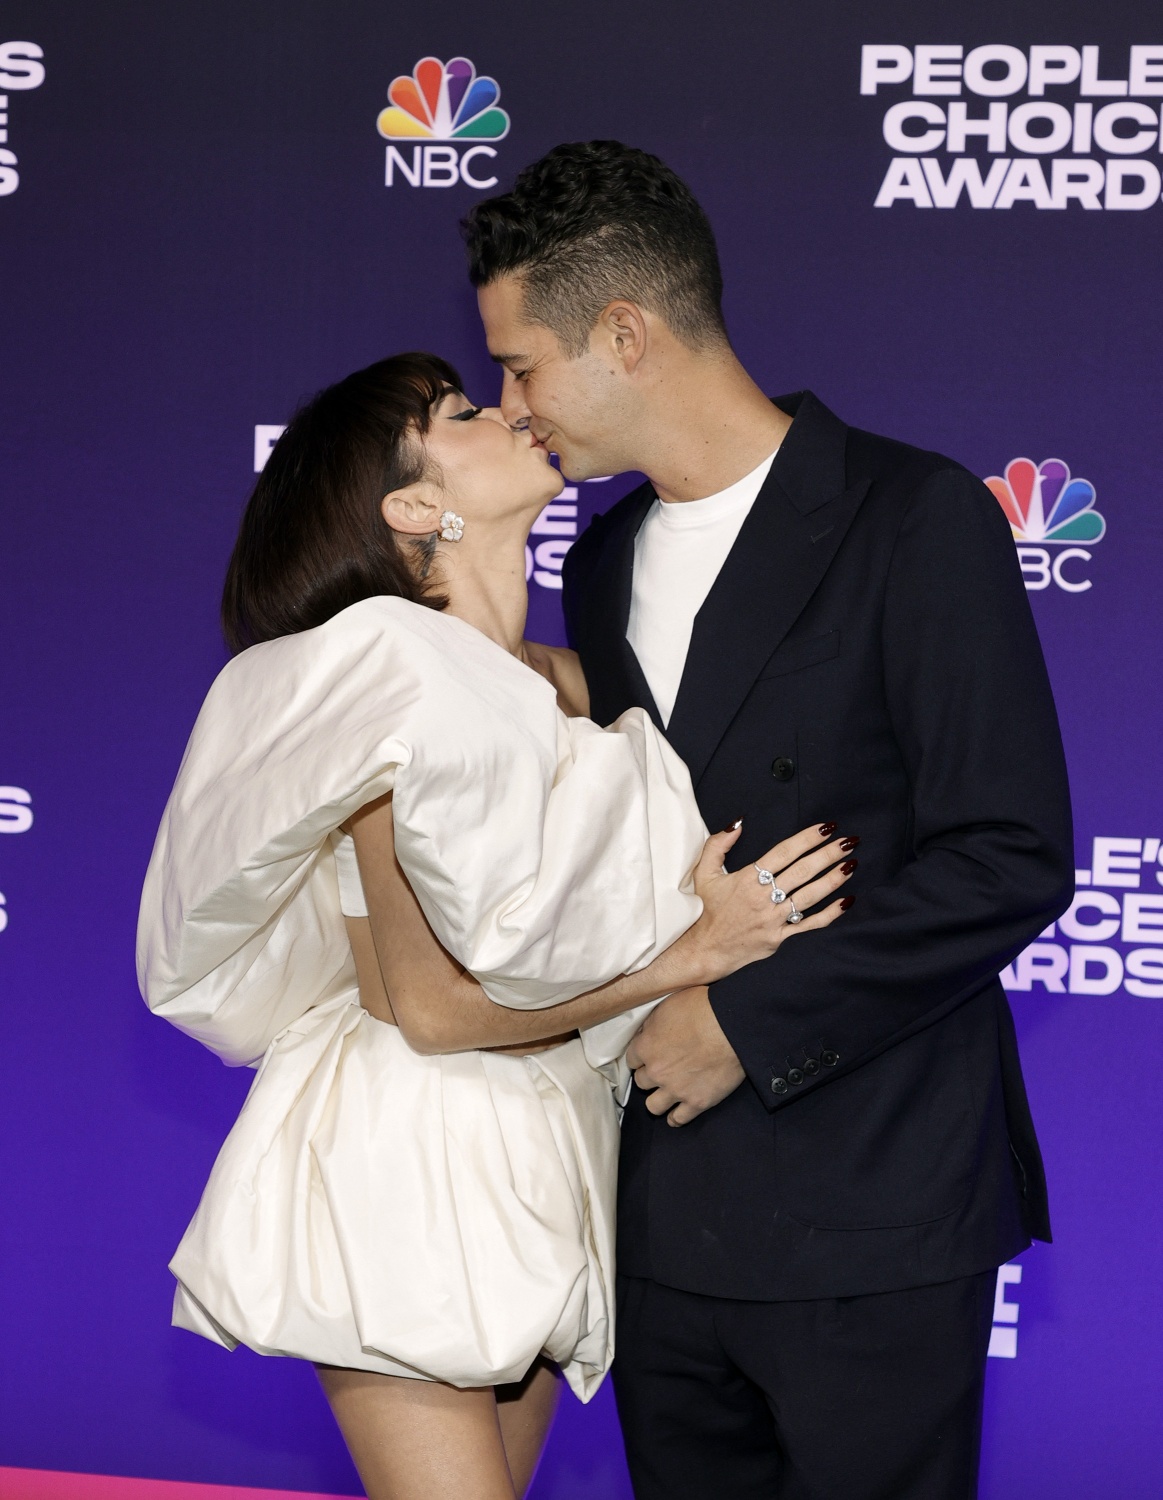  Sarah Hyland and partner Wells Adams arrive for the 47th People's Choice Awards at the Barker Hangar in Santa Monica, California, December 7, 2021. (Photo by Lisa O'CONNOR / AFP) (Photo by LISA O'CONNOR/AFP via Getty Images)